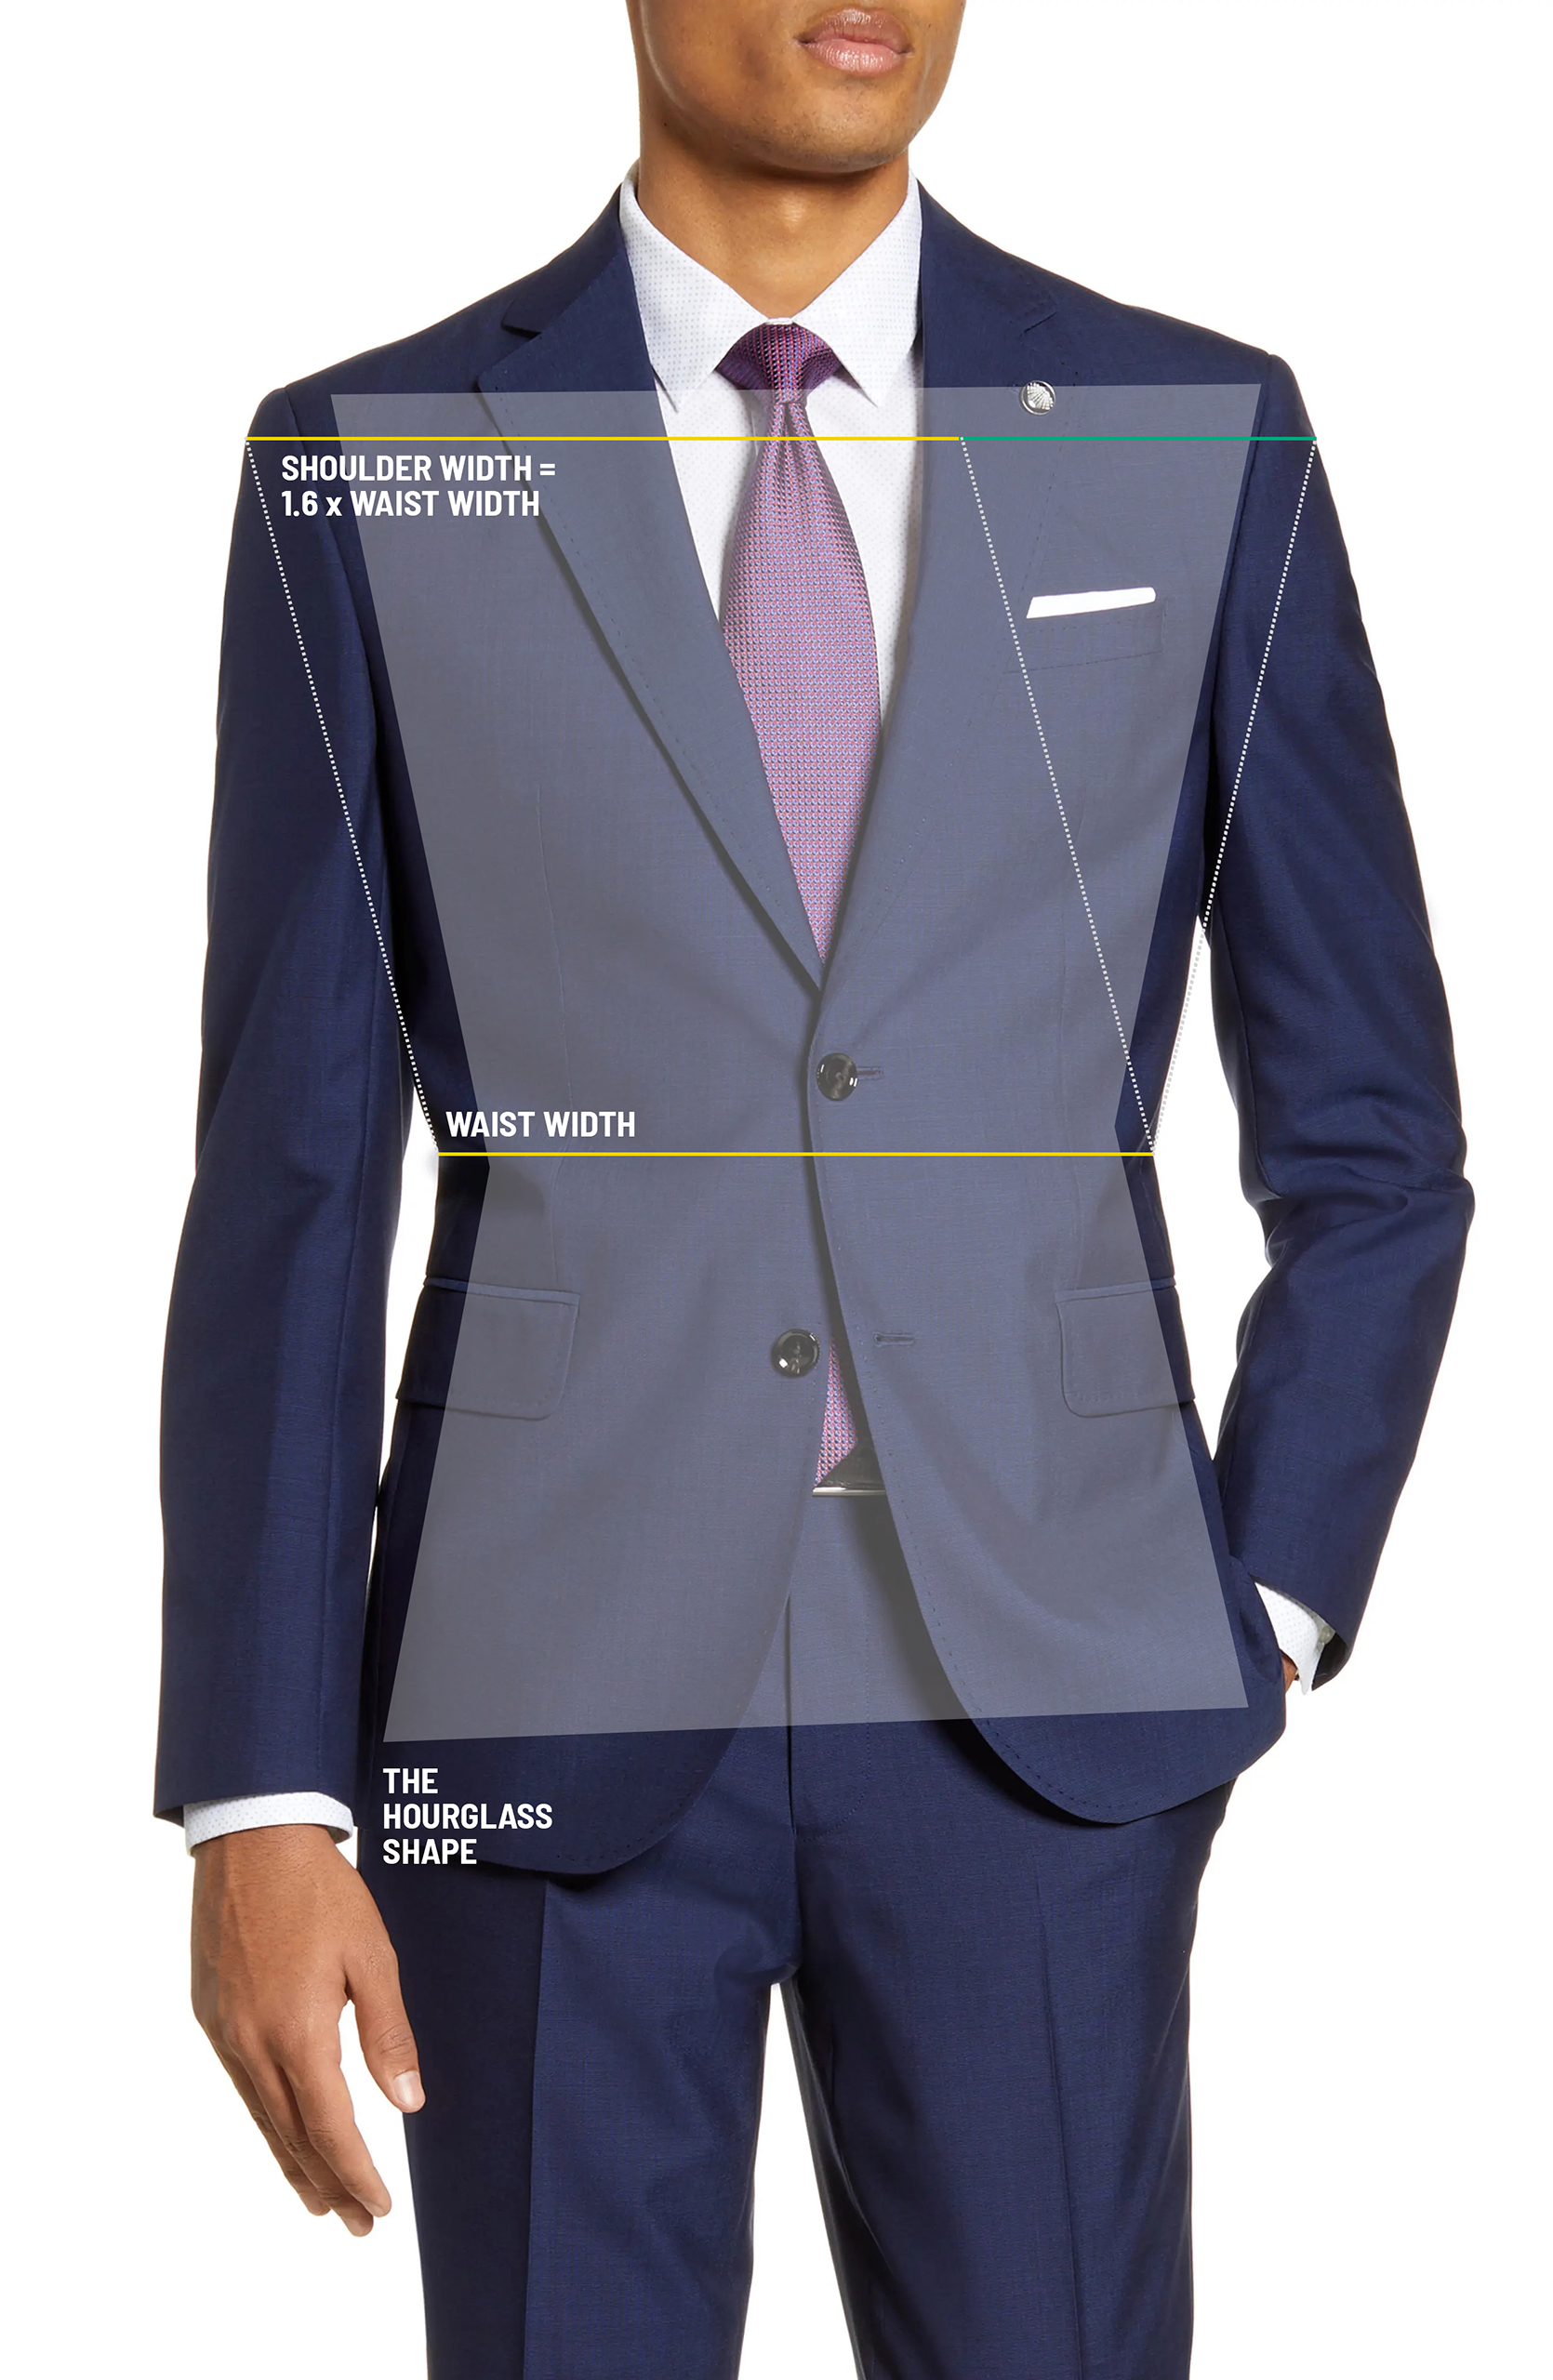 The hourglass shape in how a suit should fit